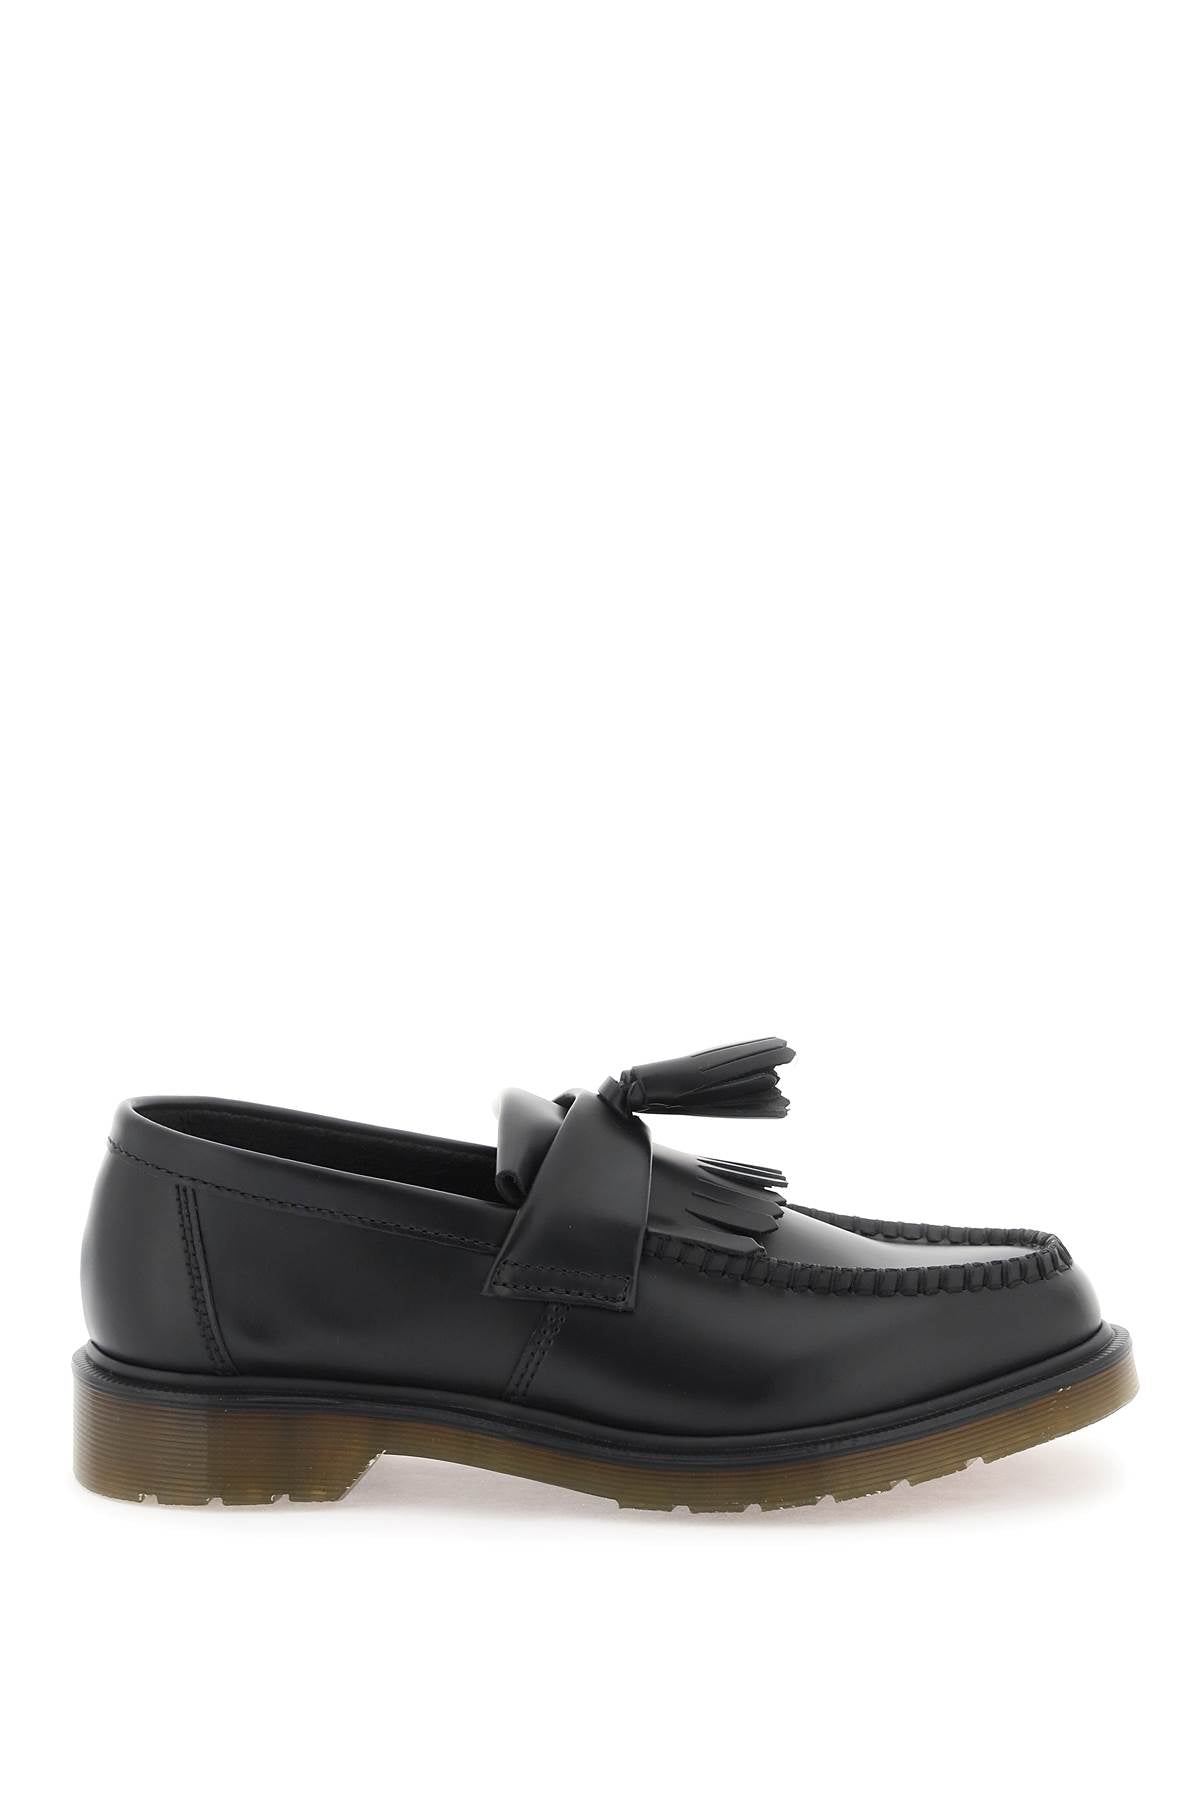 Dr.martens adrian loafers with t-0